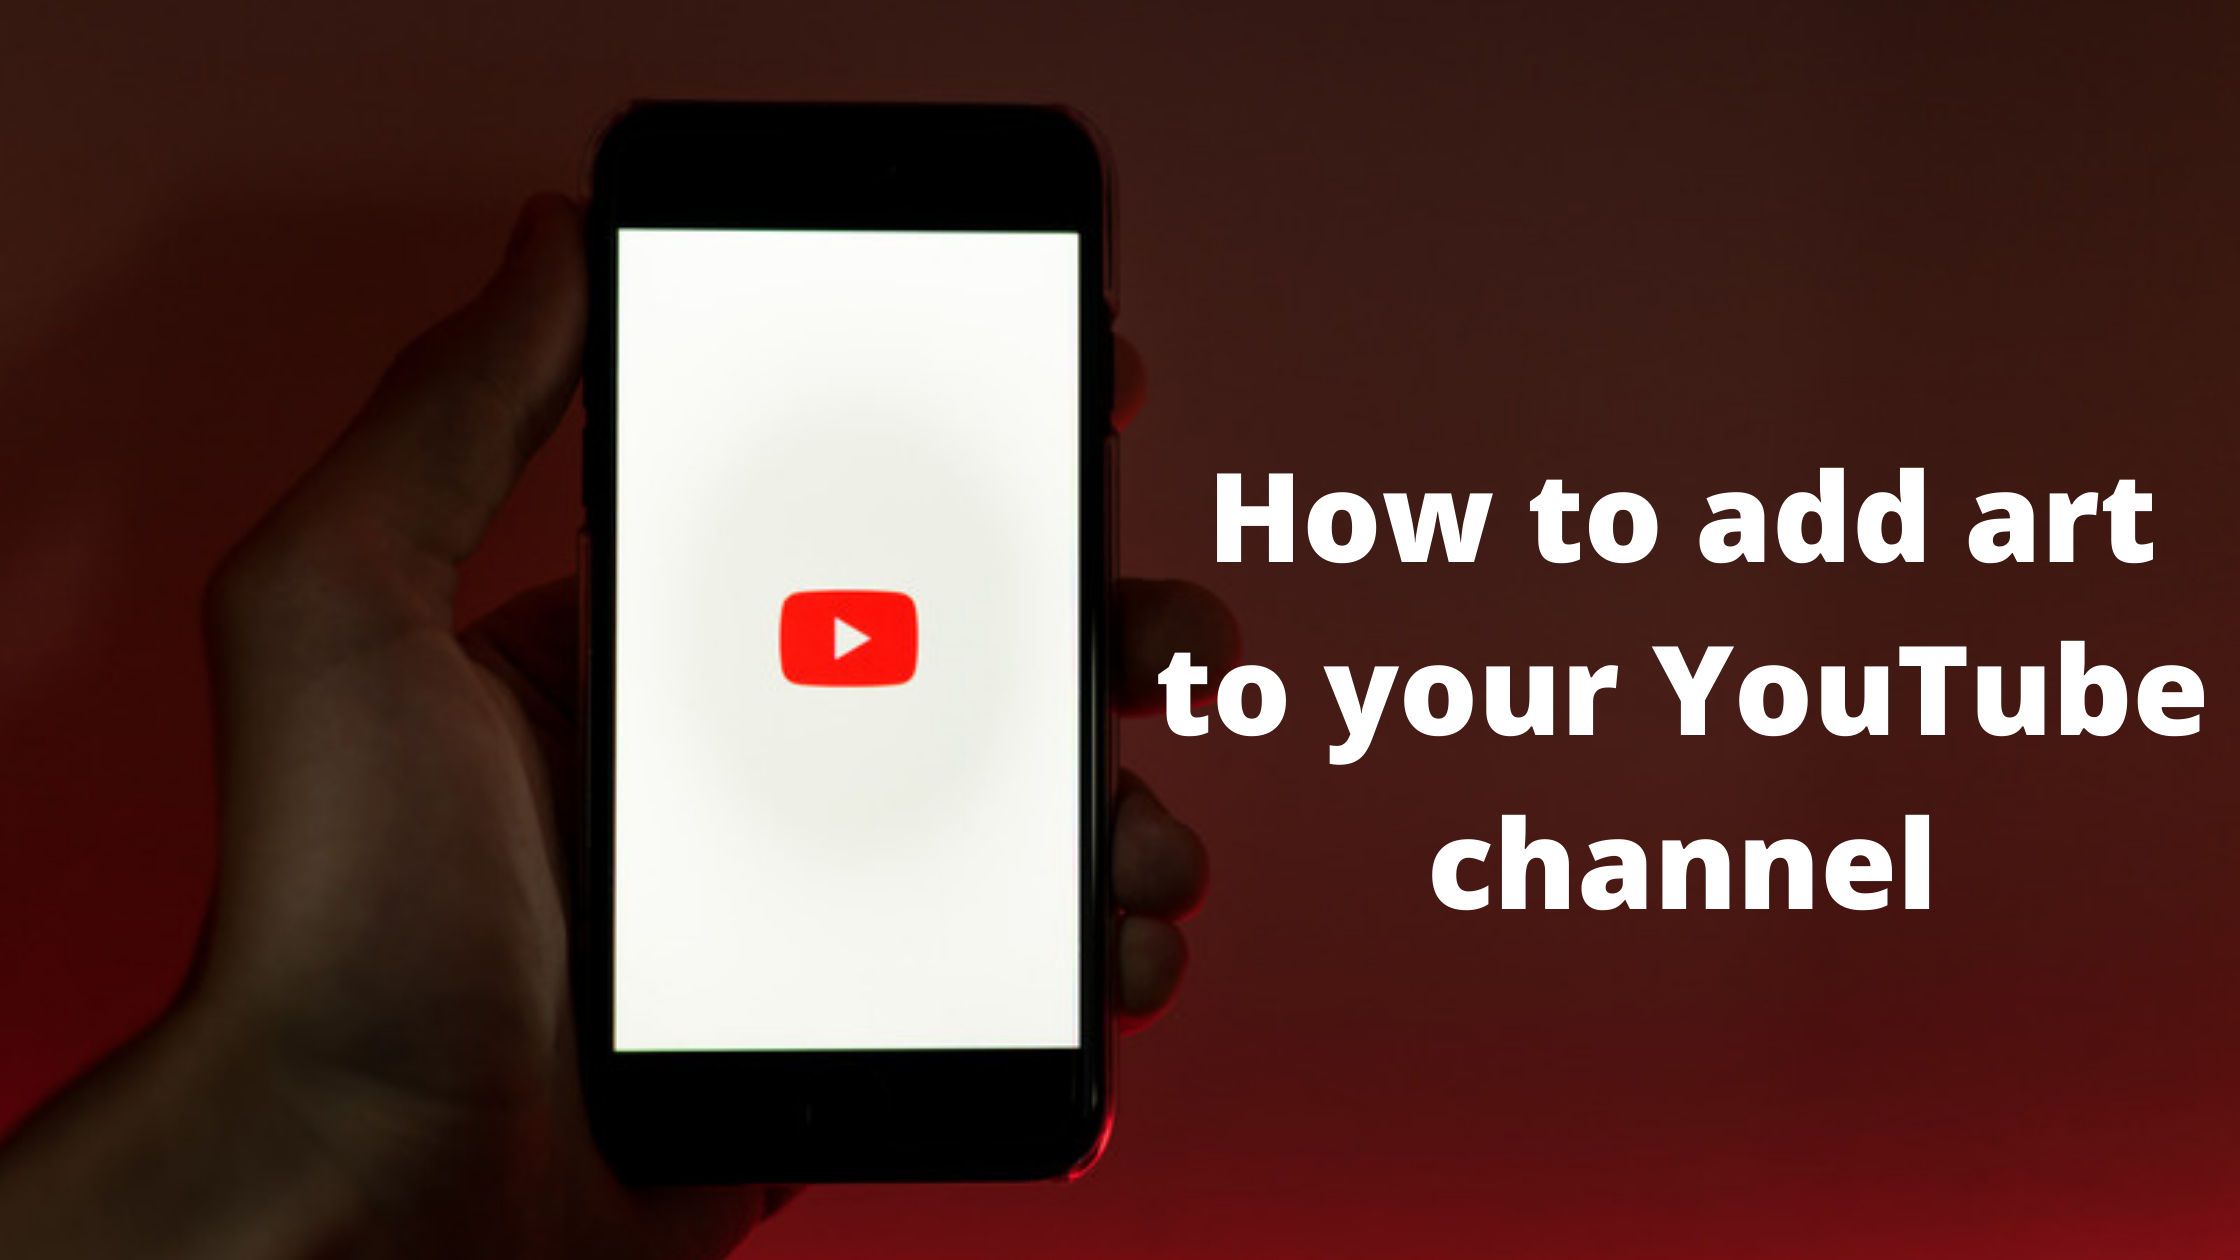 How to add art to your YouTube channel